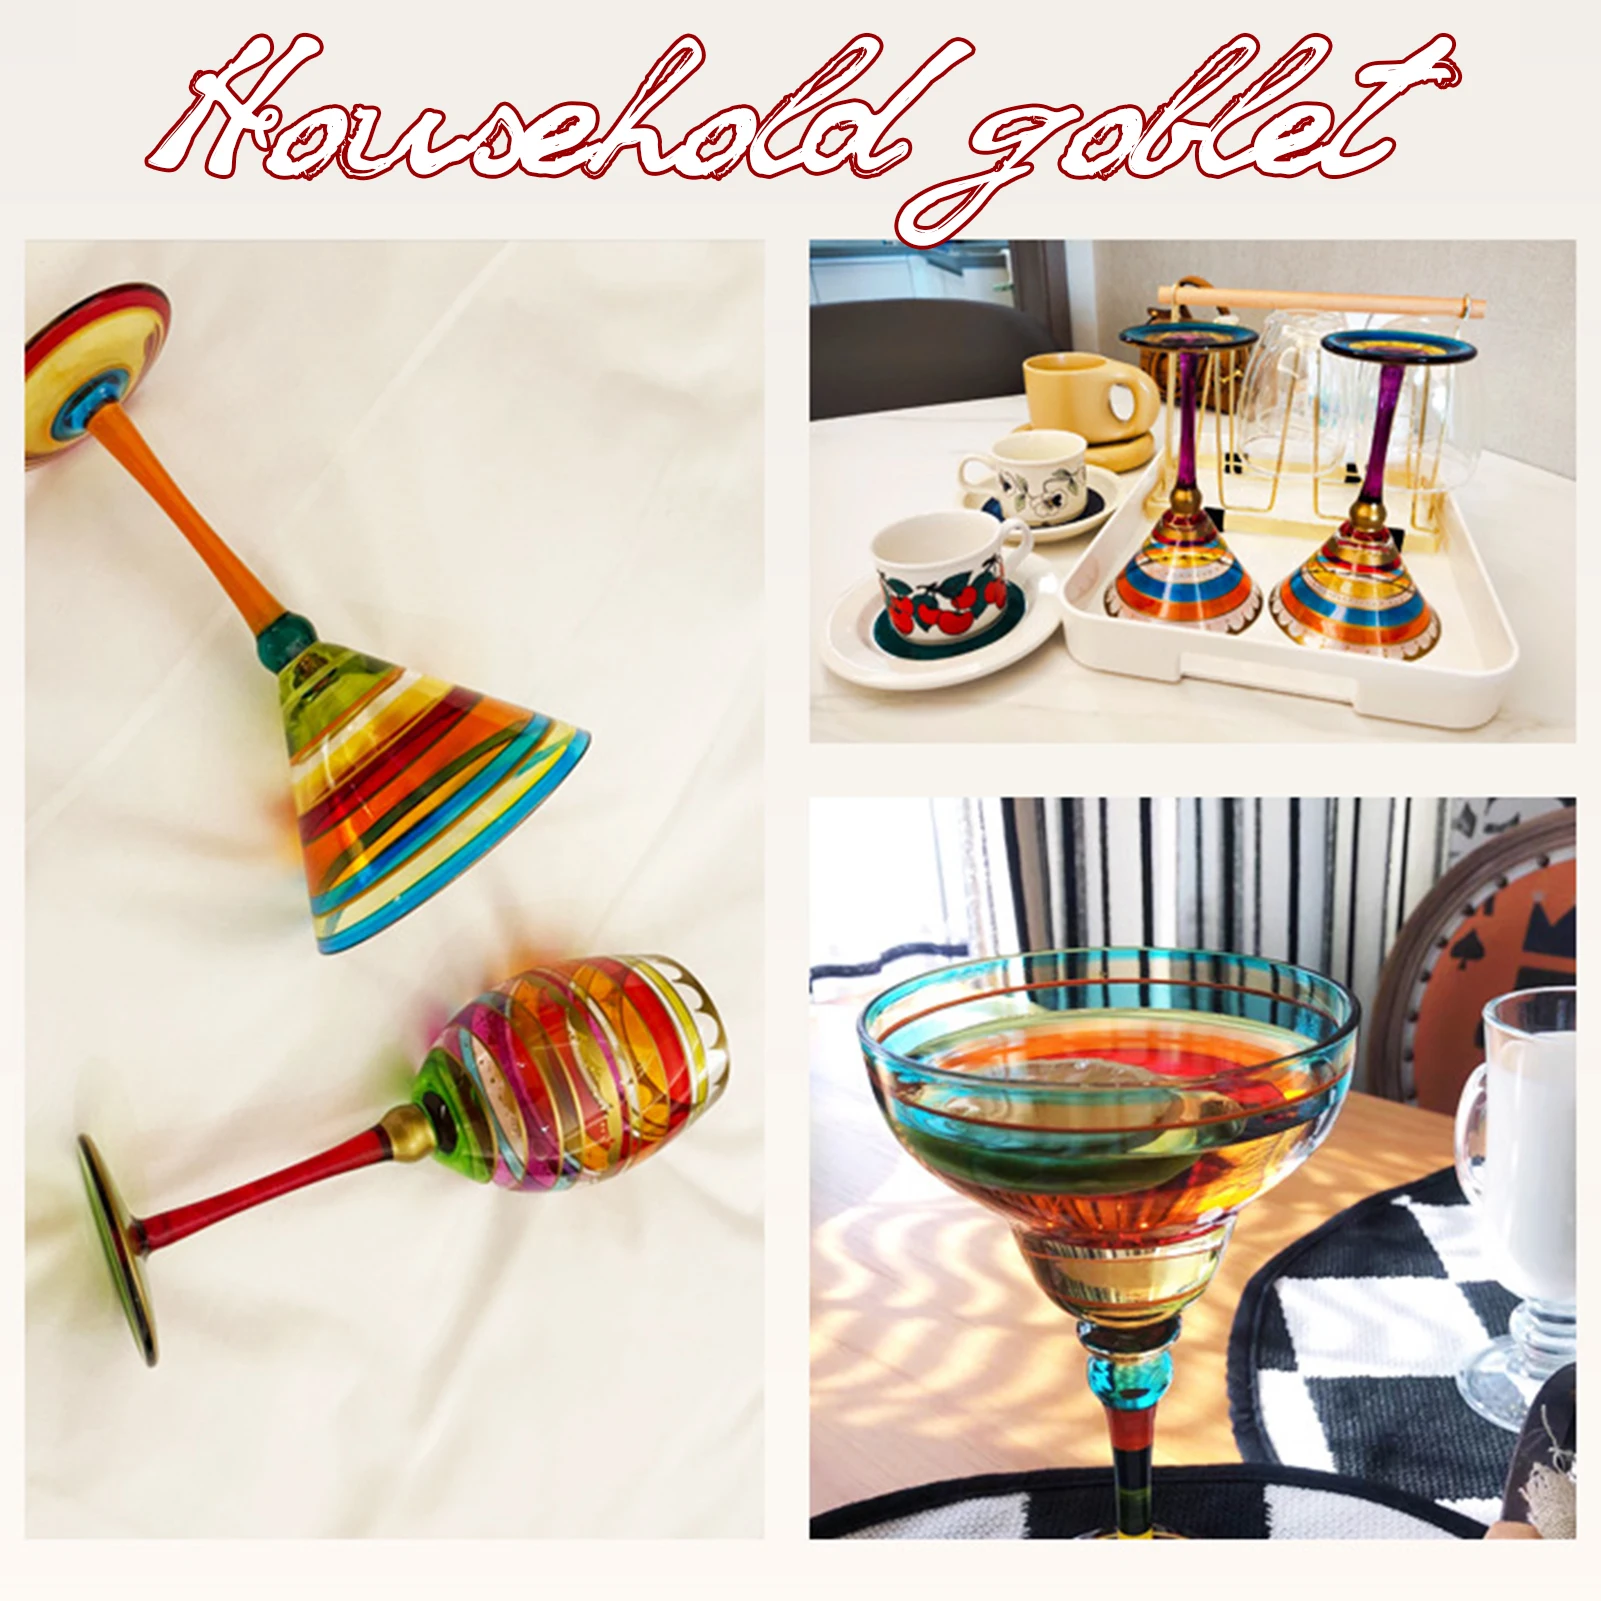 https://ae01.alicdn.com/kf/S18483a2d6dfe430b9f76b7e42b6b4d10d/270ml-Creative-Margarita-Wine-Glasses-Handmade-Cocktail-Goblet-Cup-Colorful-Printed-Champagne-Cup-For-Bar-Party.jpg